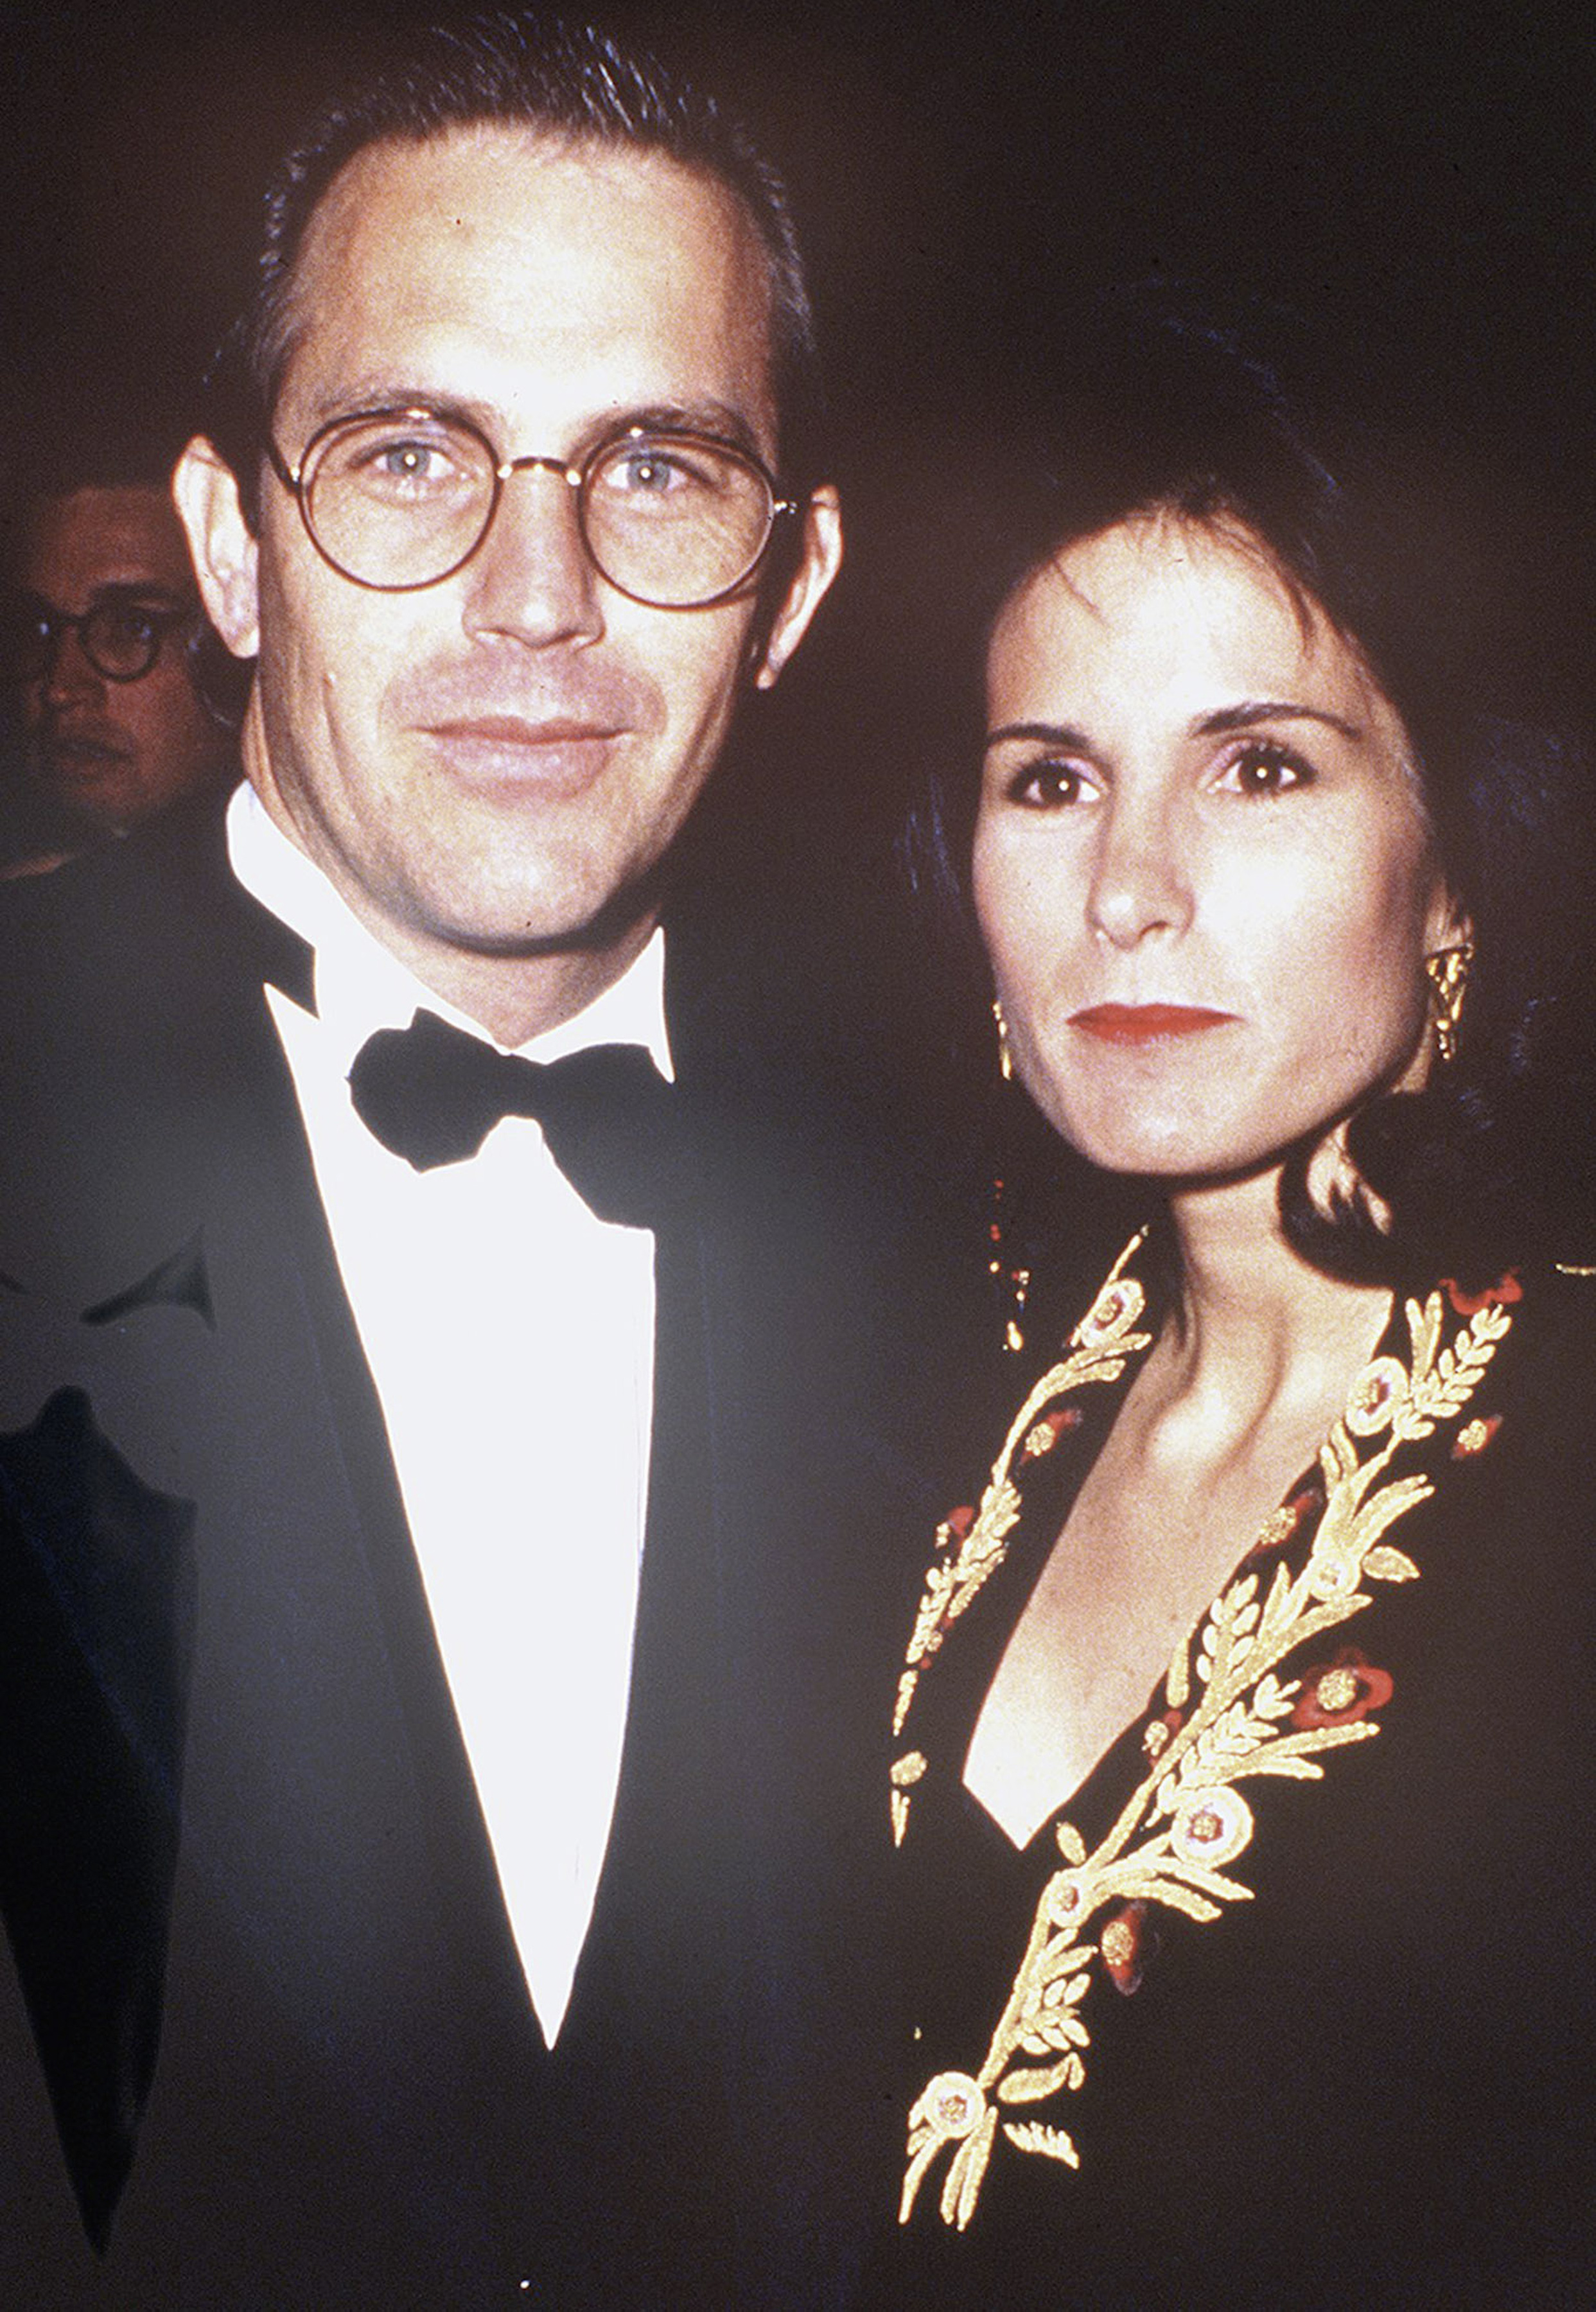 Cindy Costner and American actor, director, producer, and musician Kevin Costner at the "Dances With Wolves" Los Angeles premiere at Cineplex Odeon Cinema in Los Angeles, California, on November 4, 1990 | Source: Getty Images